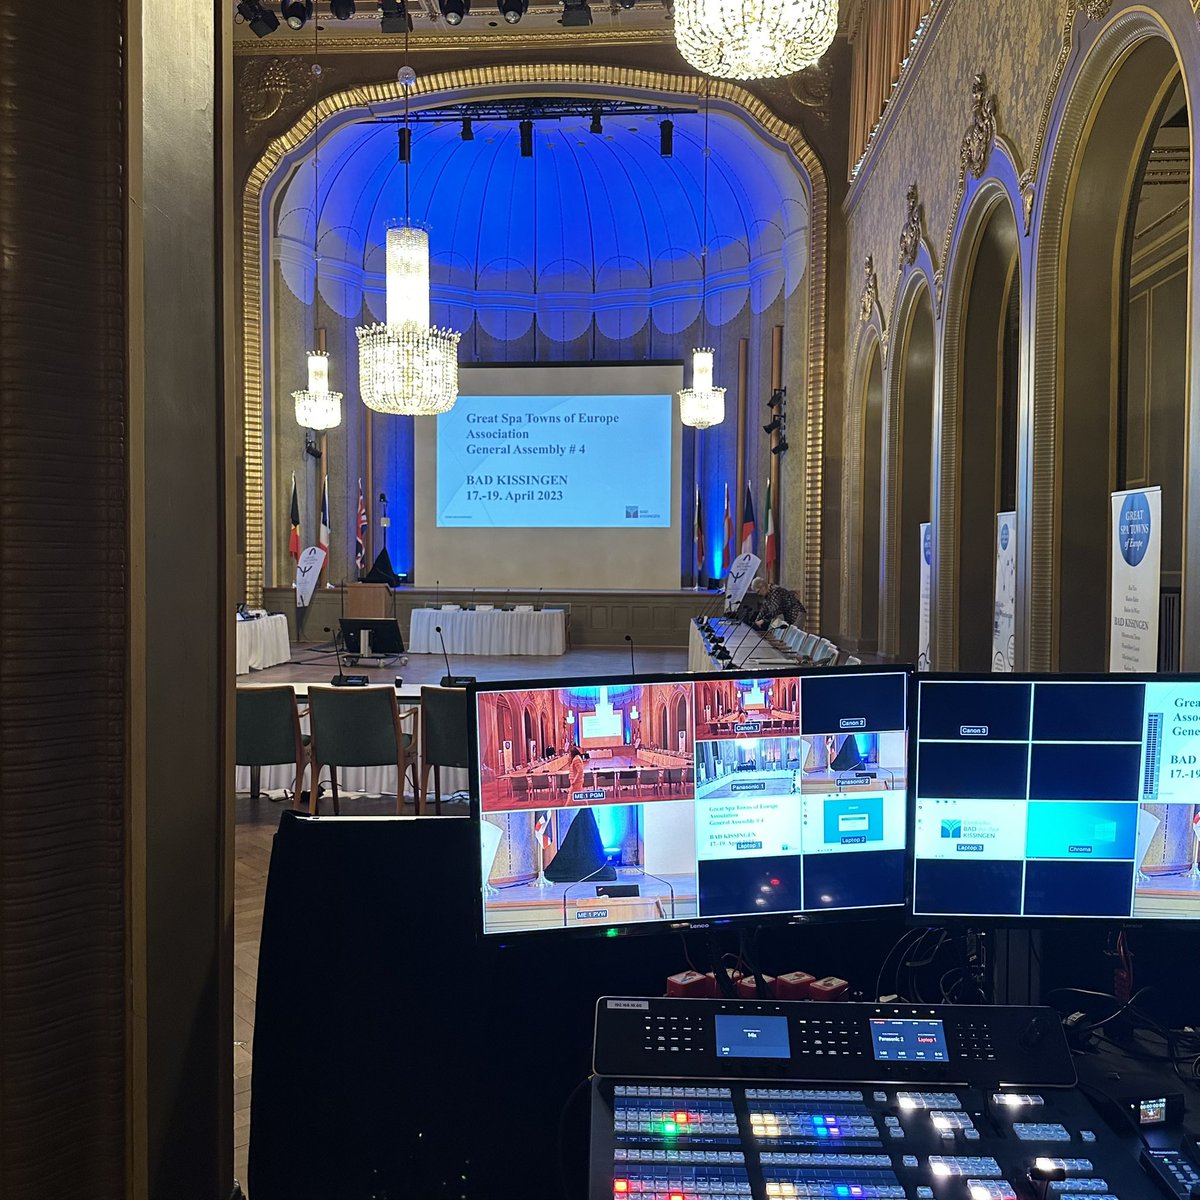 The stage is set! We are ready for the Great Spa Towns of Europe Association’s General Assembly - and it’s #WorldHeritageDay2024 too! #greatspatownsofeurope #unesco #worldheritagesite #idms #idms2024 #icomos